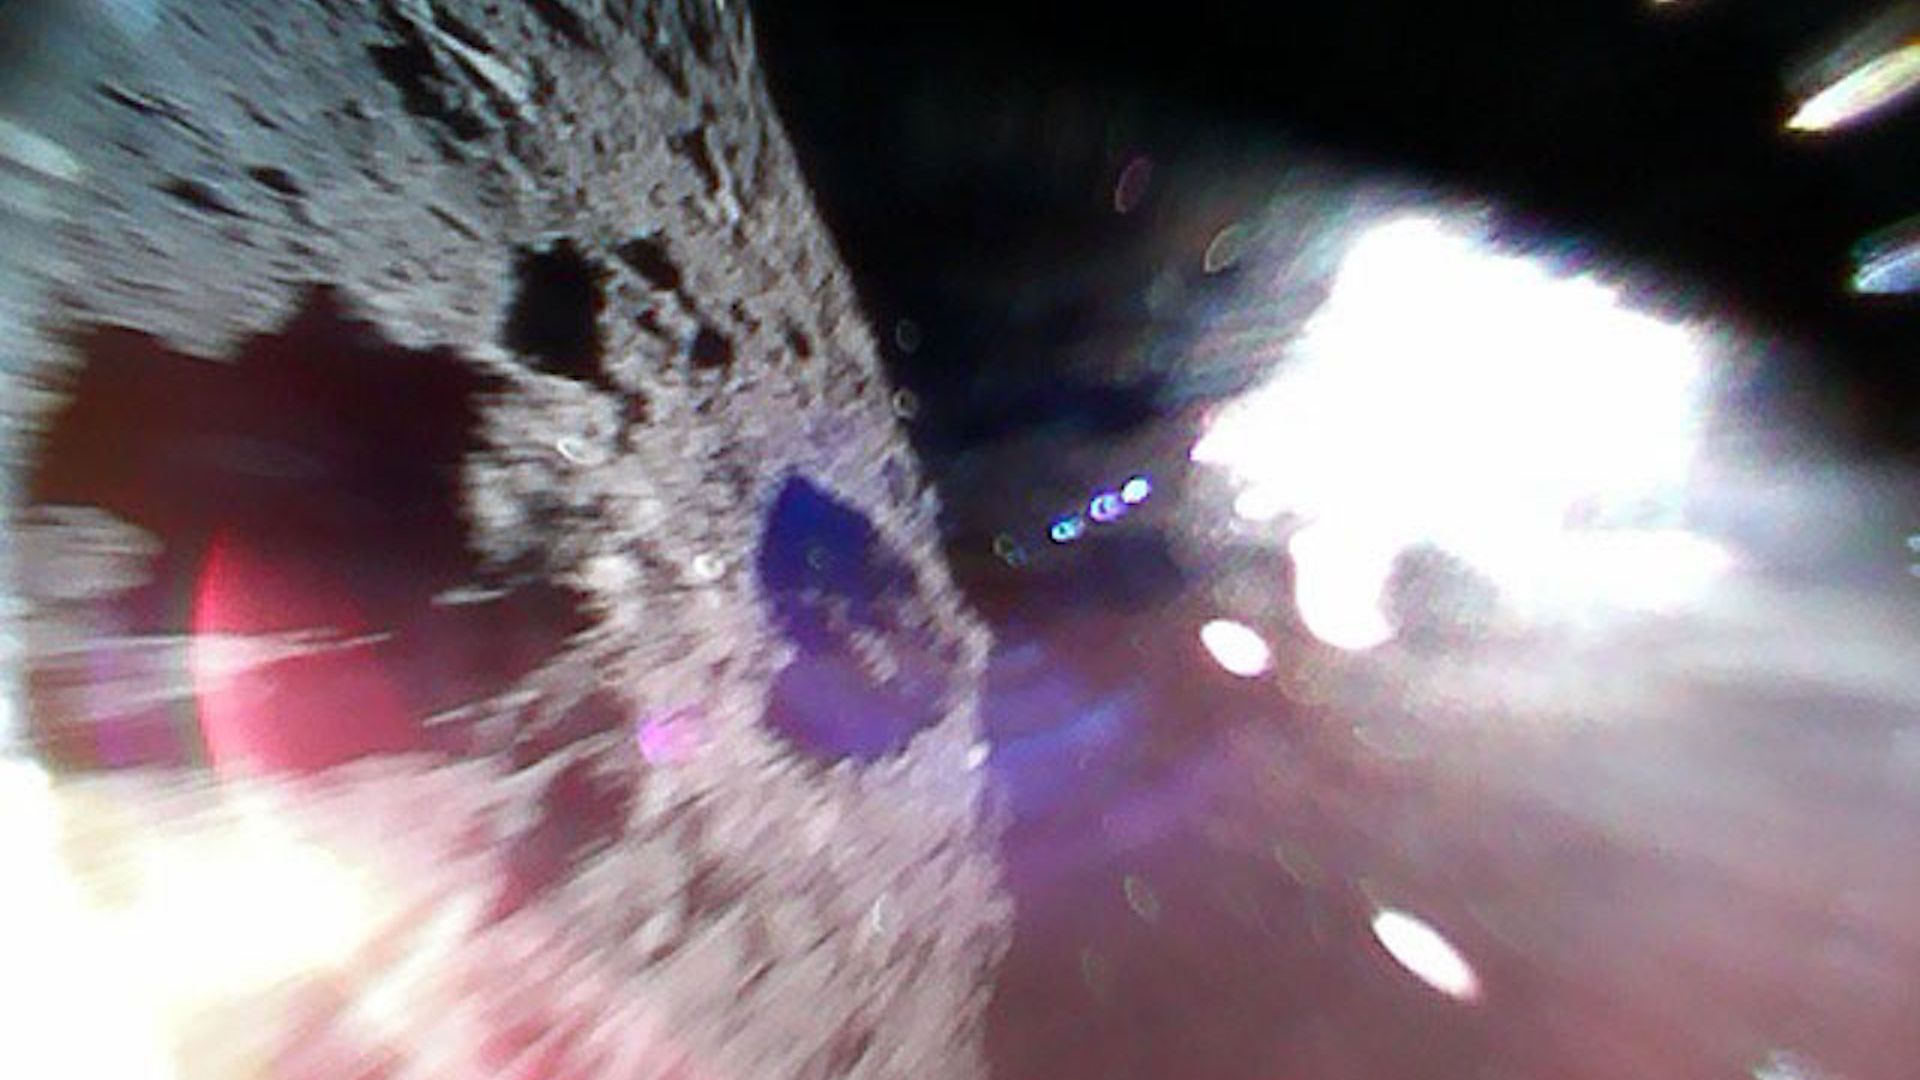  Image captured by Rover-1A on September 22 at around 11:44 JST. Color image captured while moving (during a hop) on the surface of Ryugu. 